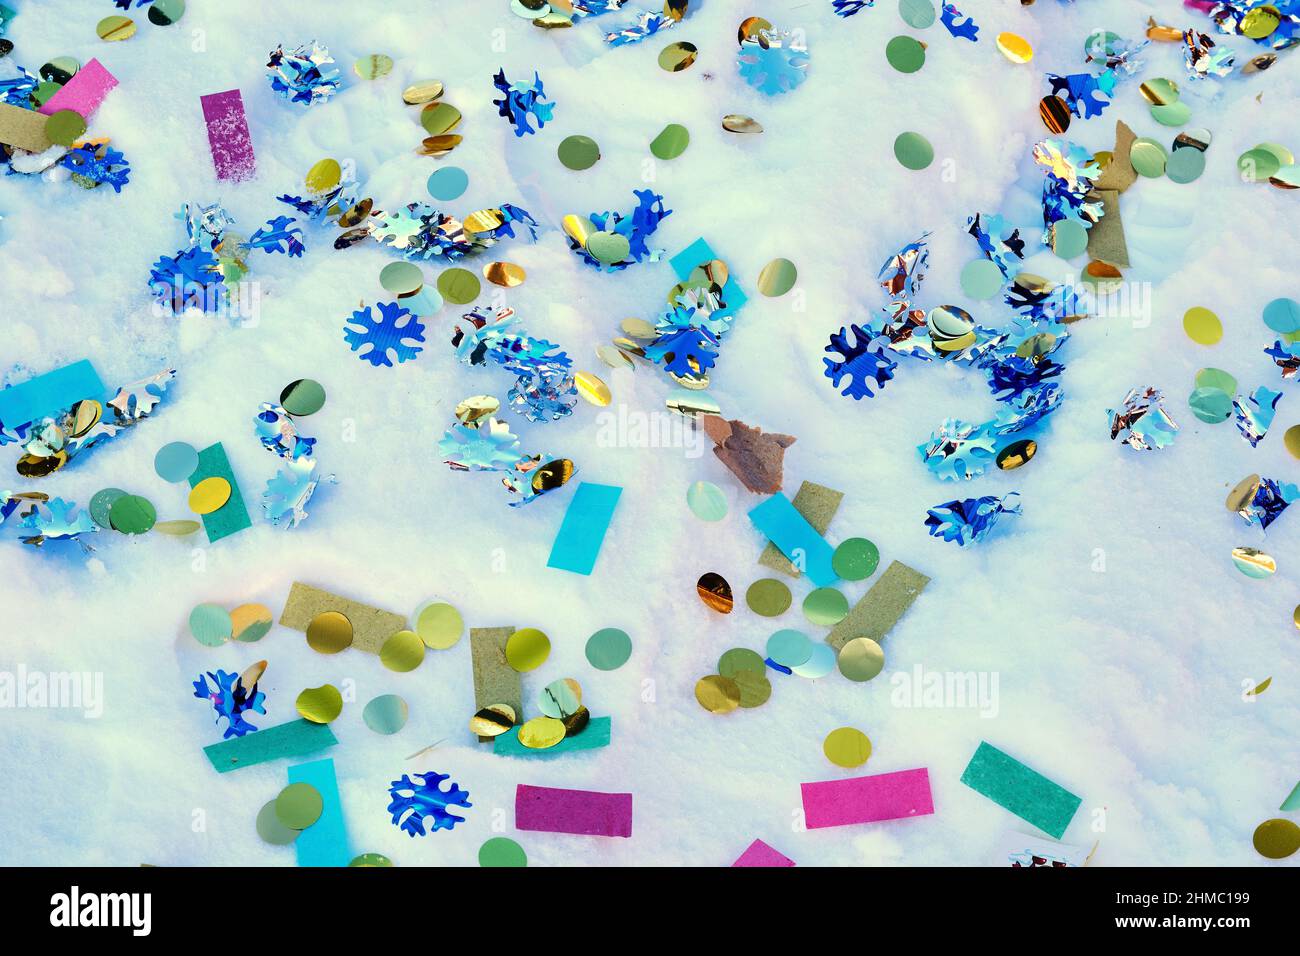 Festive confetti from a cracker is scattered on fresh snow. Holidays and events backgrounds Stock Photo